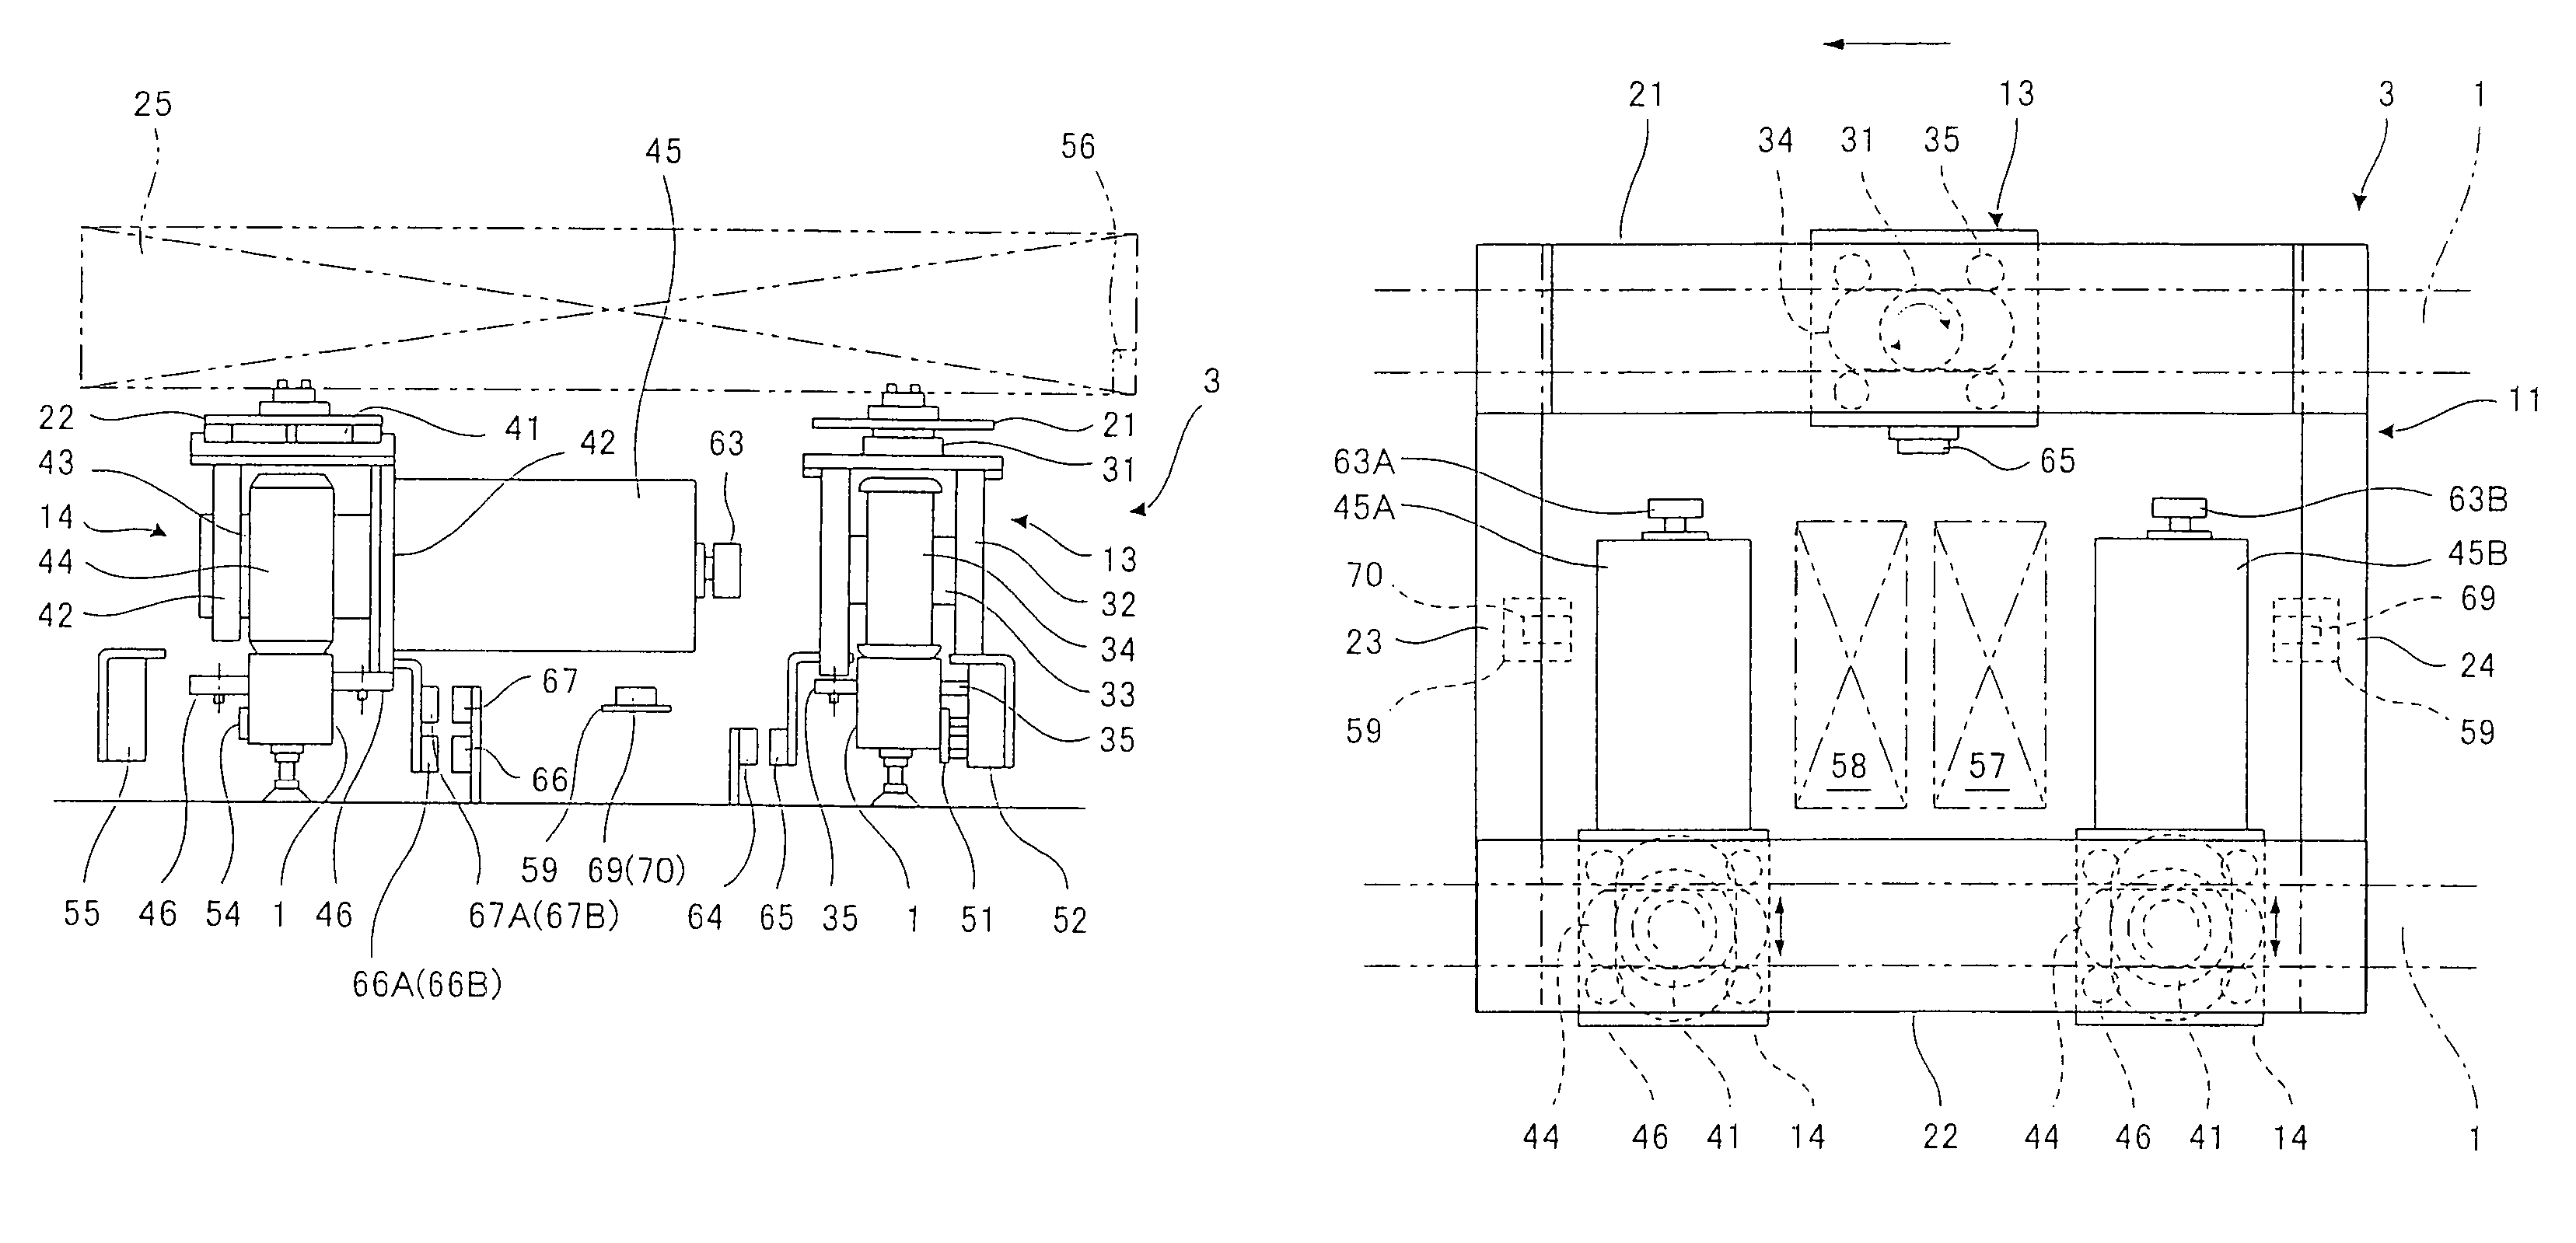 Travel control method for travel vehicle